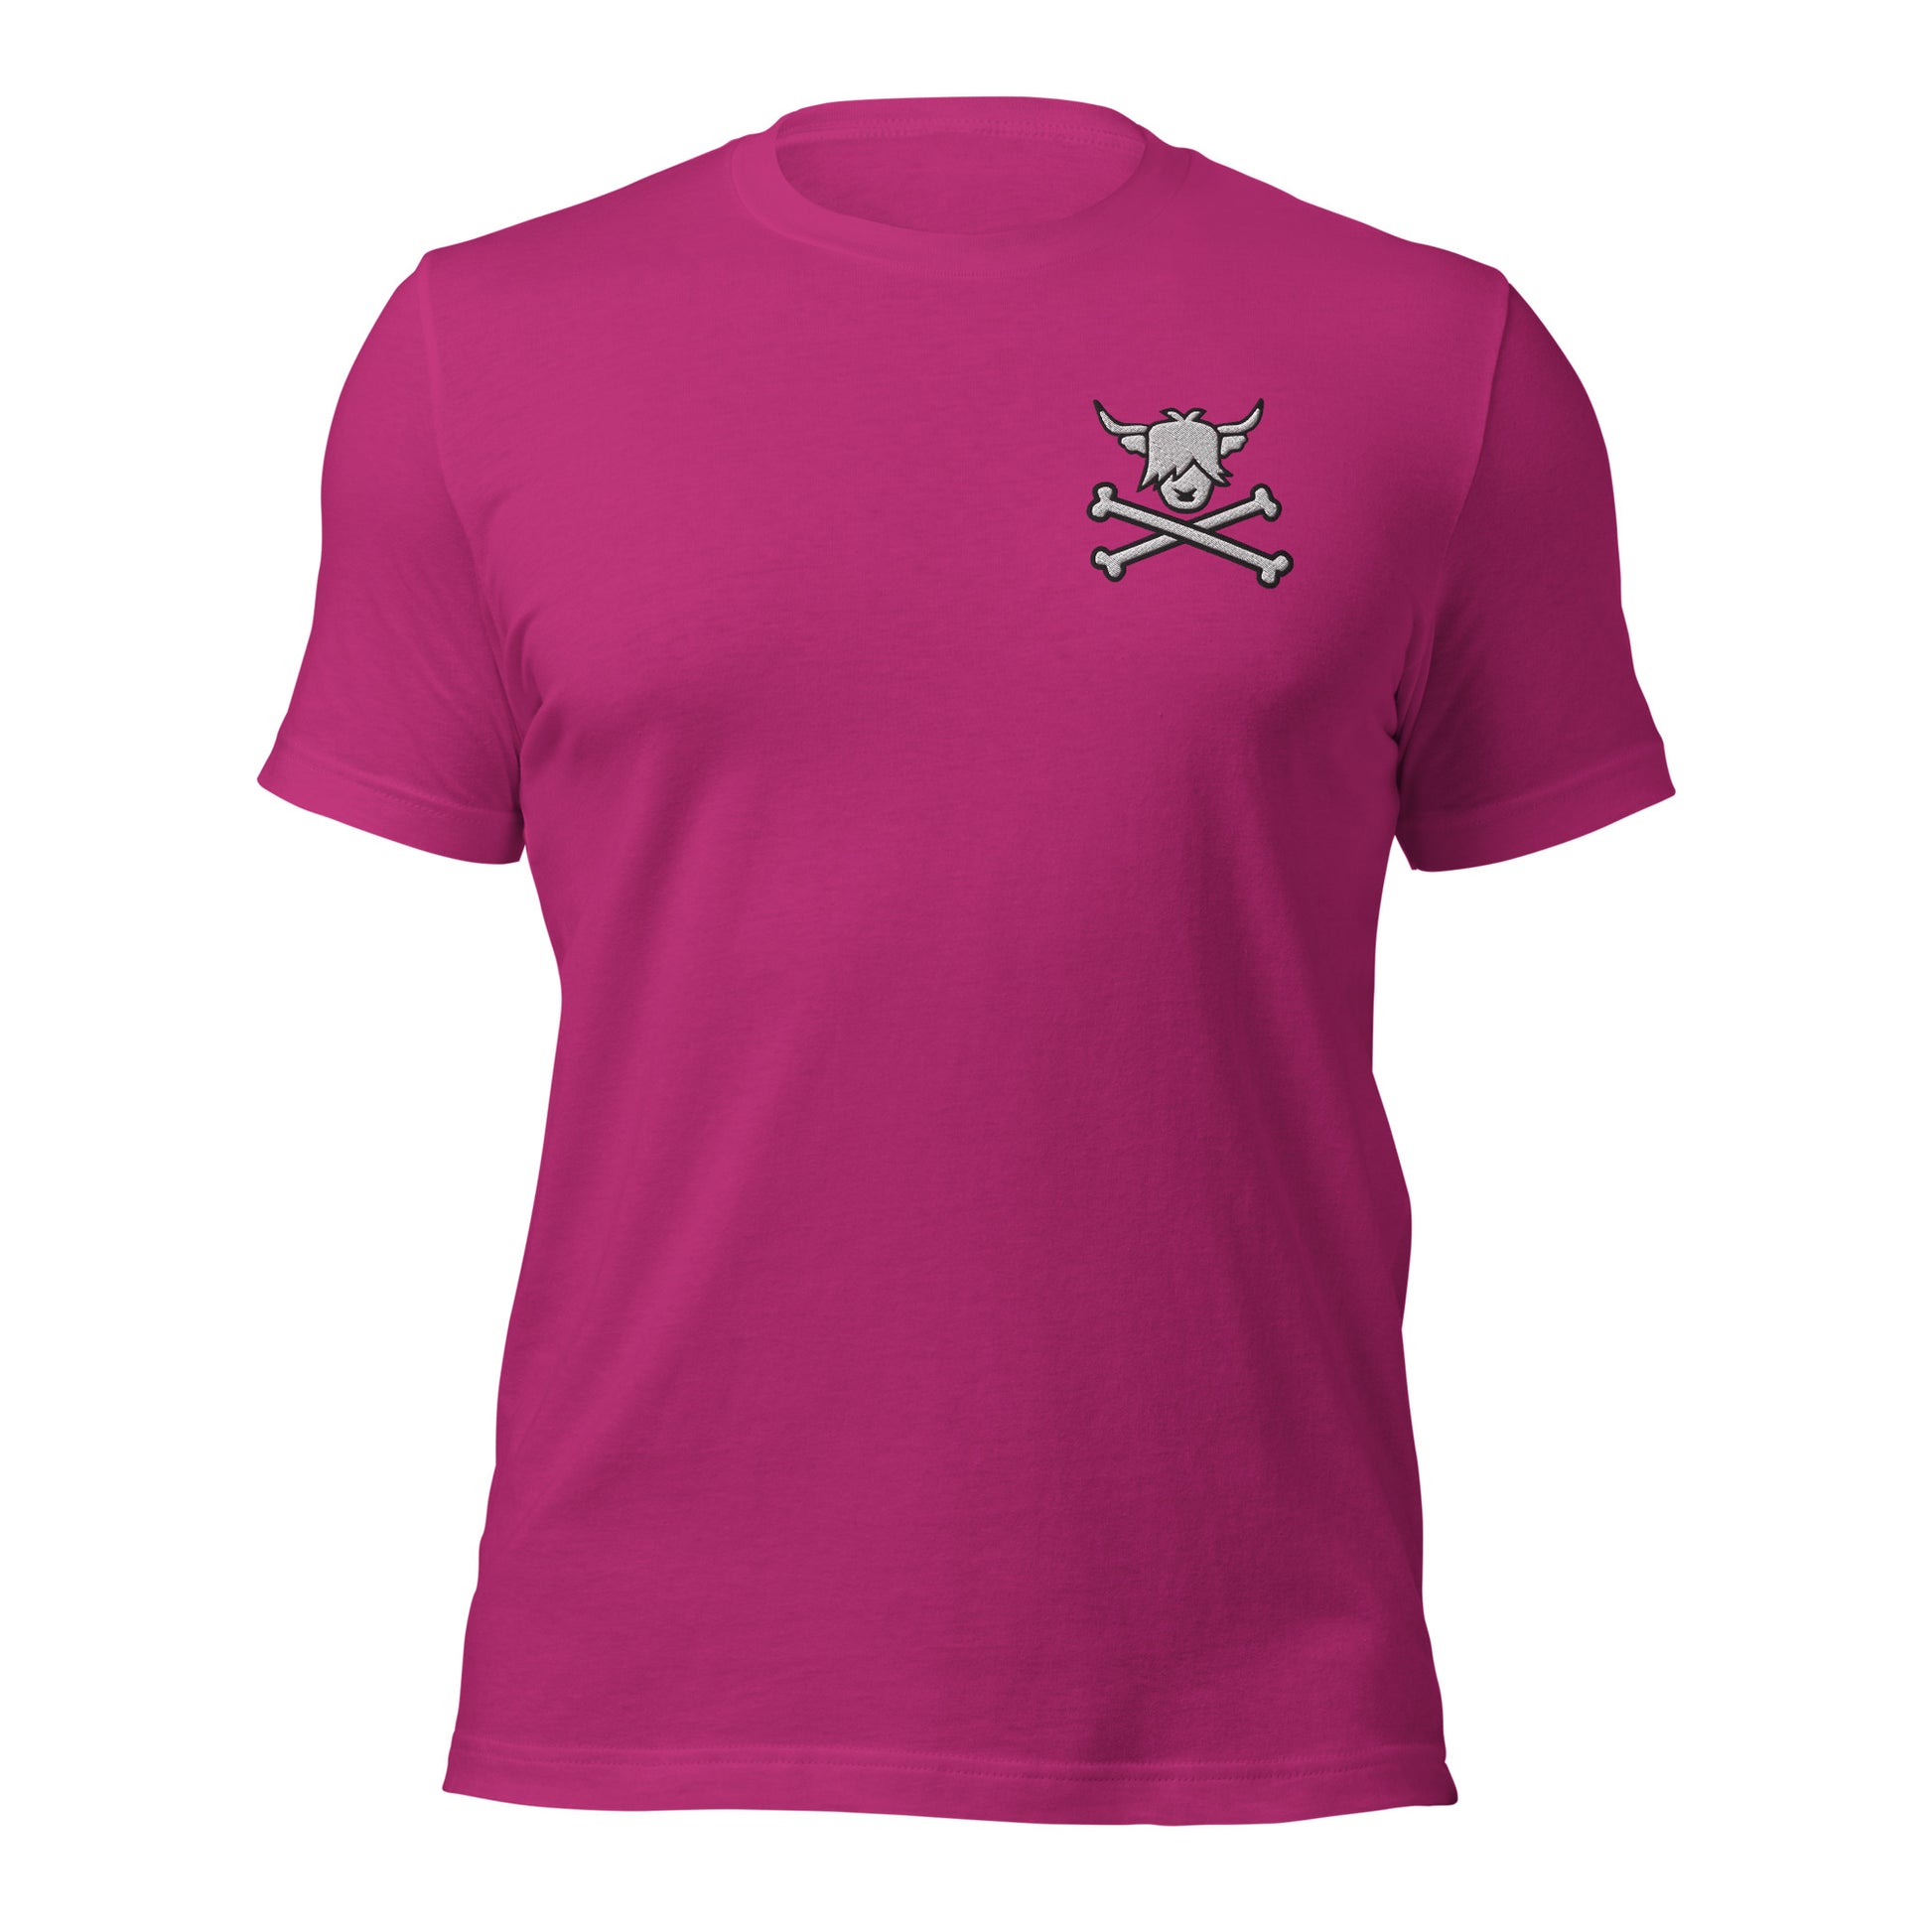 Pink tshirt with embroidered cow